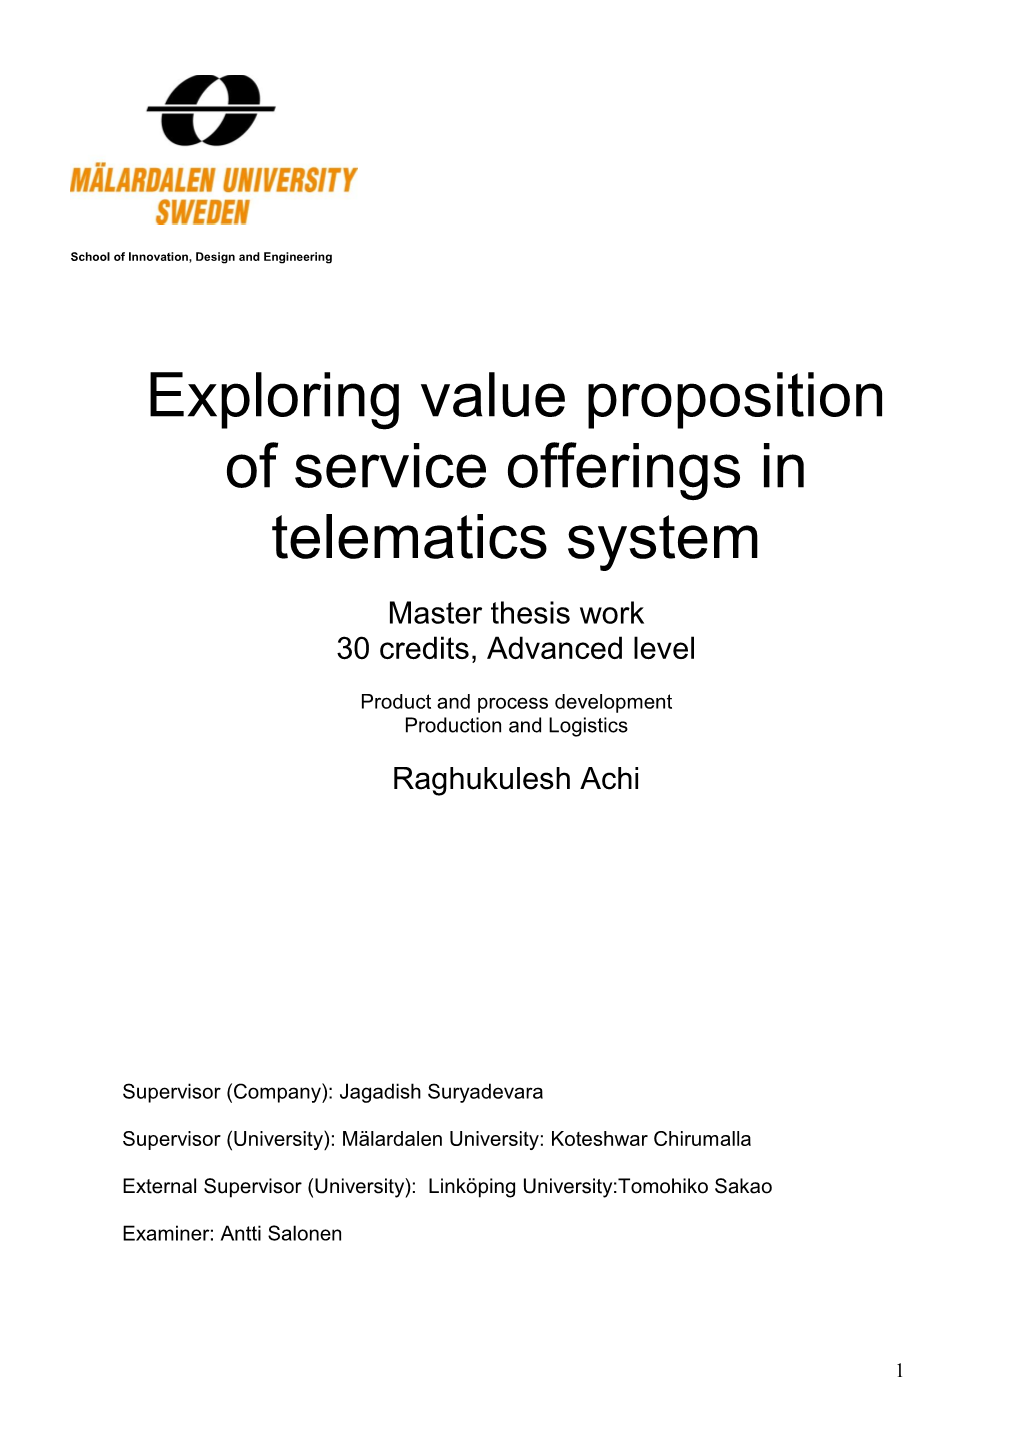 Exploring Value Proposition of Service Offerings in Telematics System